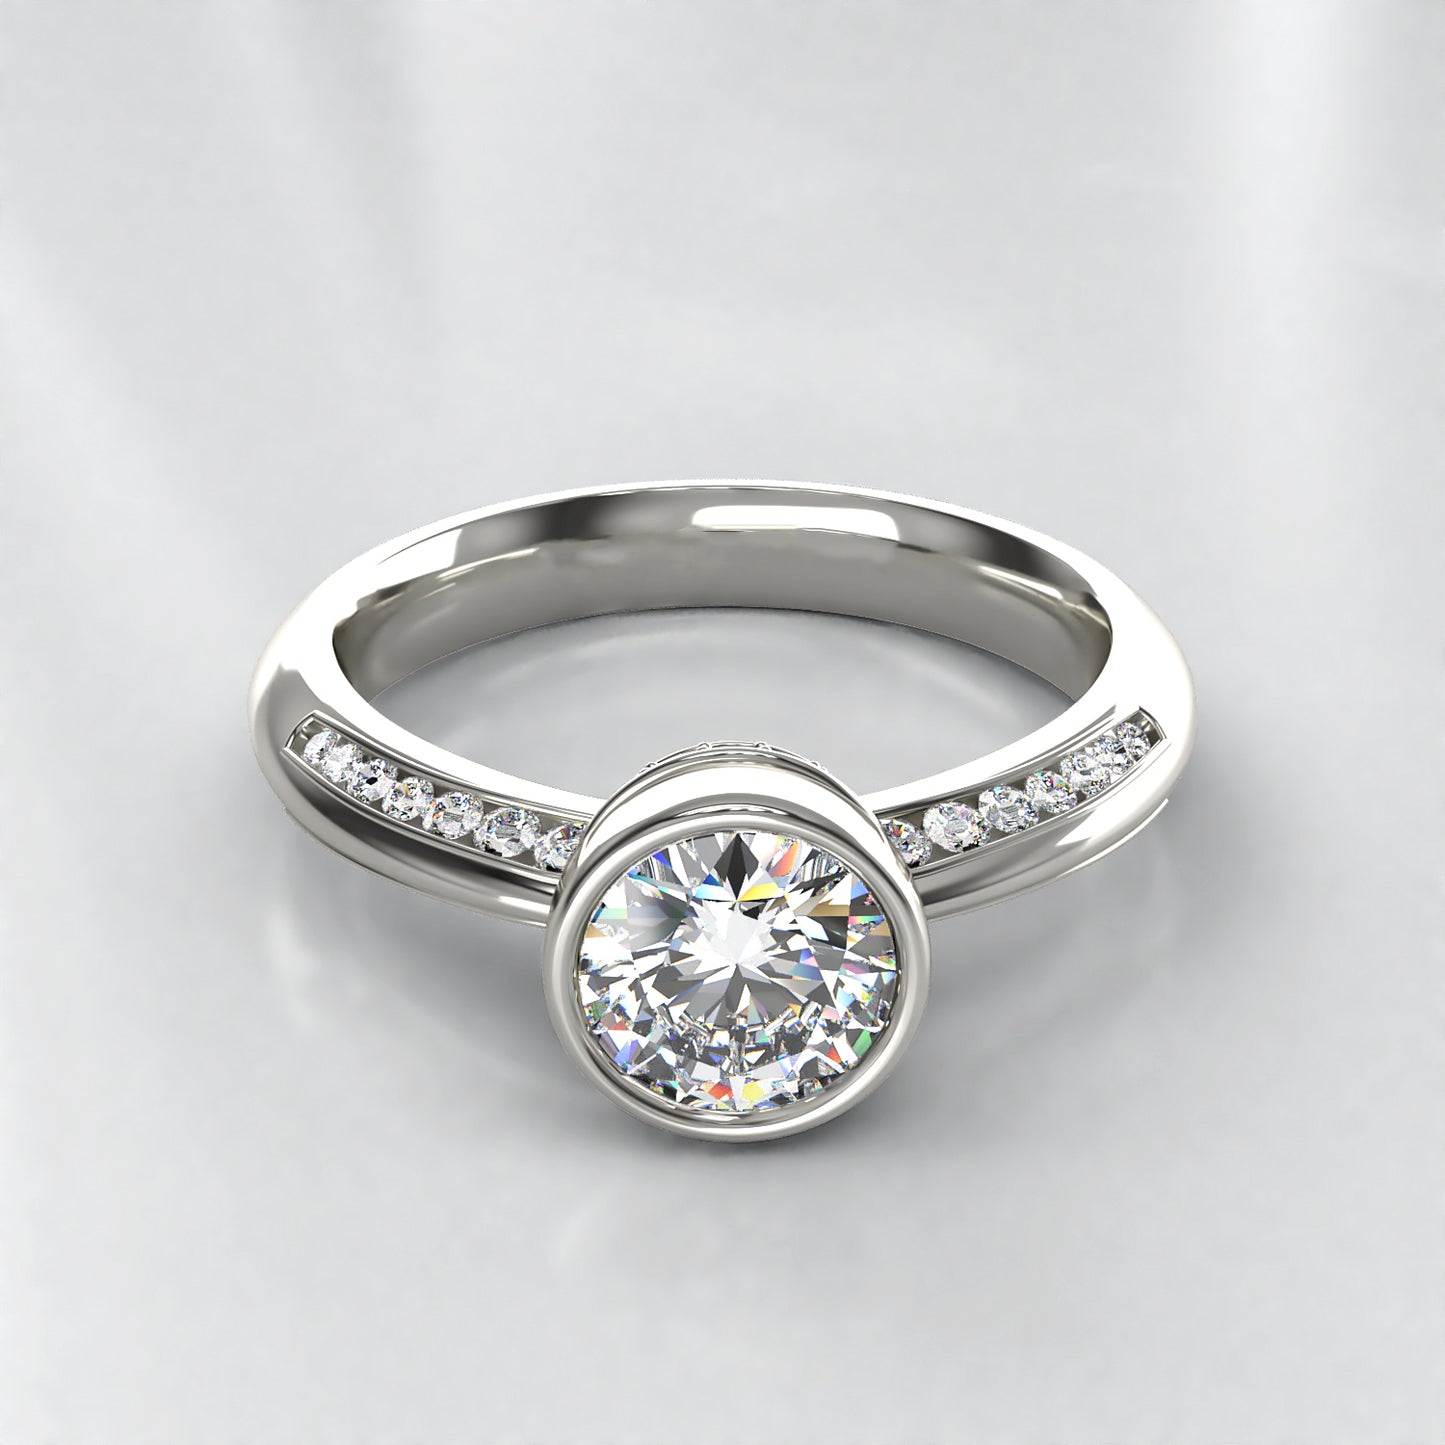 Elsbeth: 18ct White Gold Engagement Ring with Diamond Set Shoulders